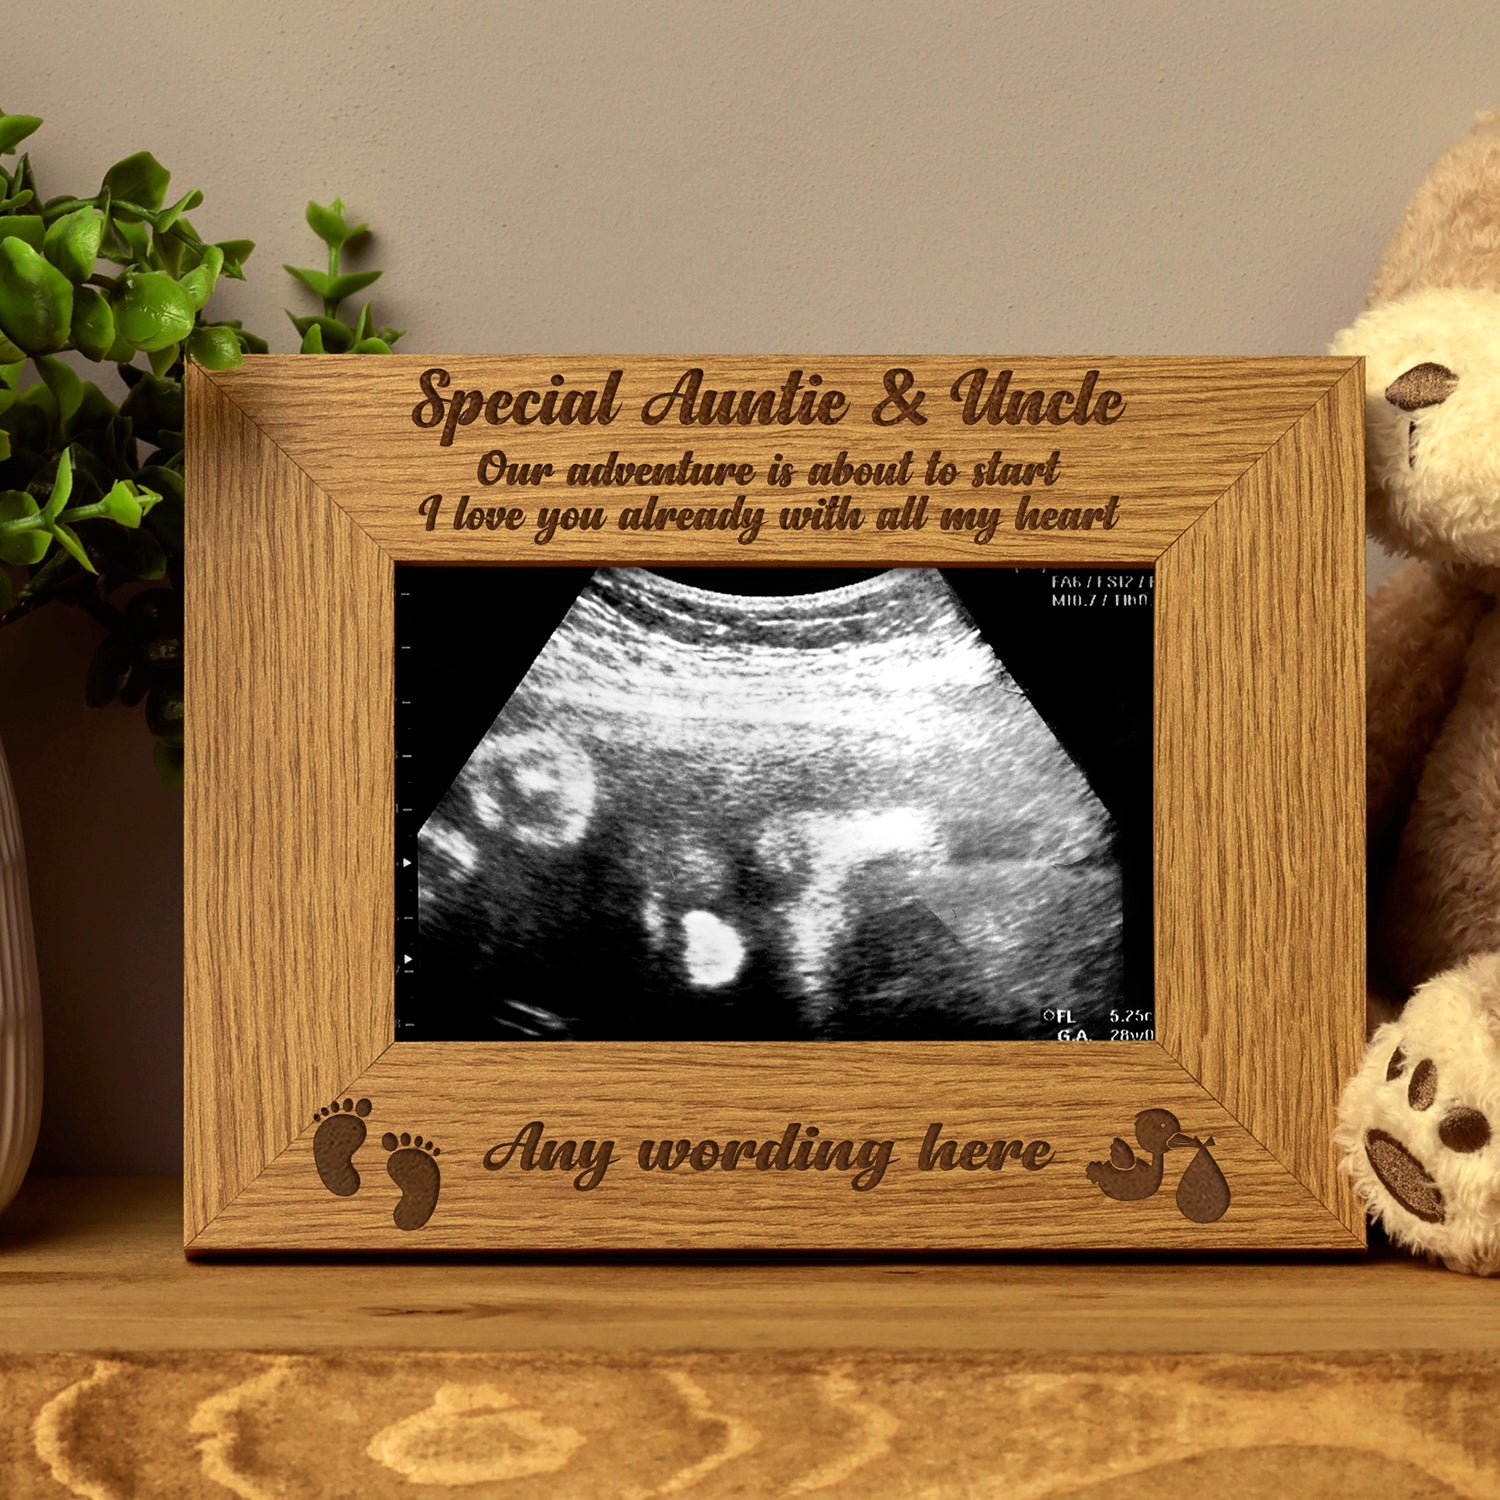 New Baby Pregnancy Scan Wooden Photo Frame Personalised Auntie Gift - ukgiftstoreonline